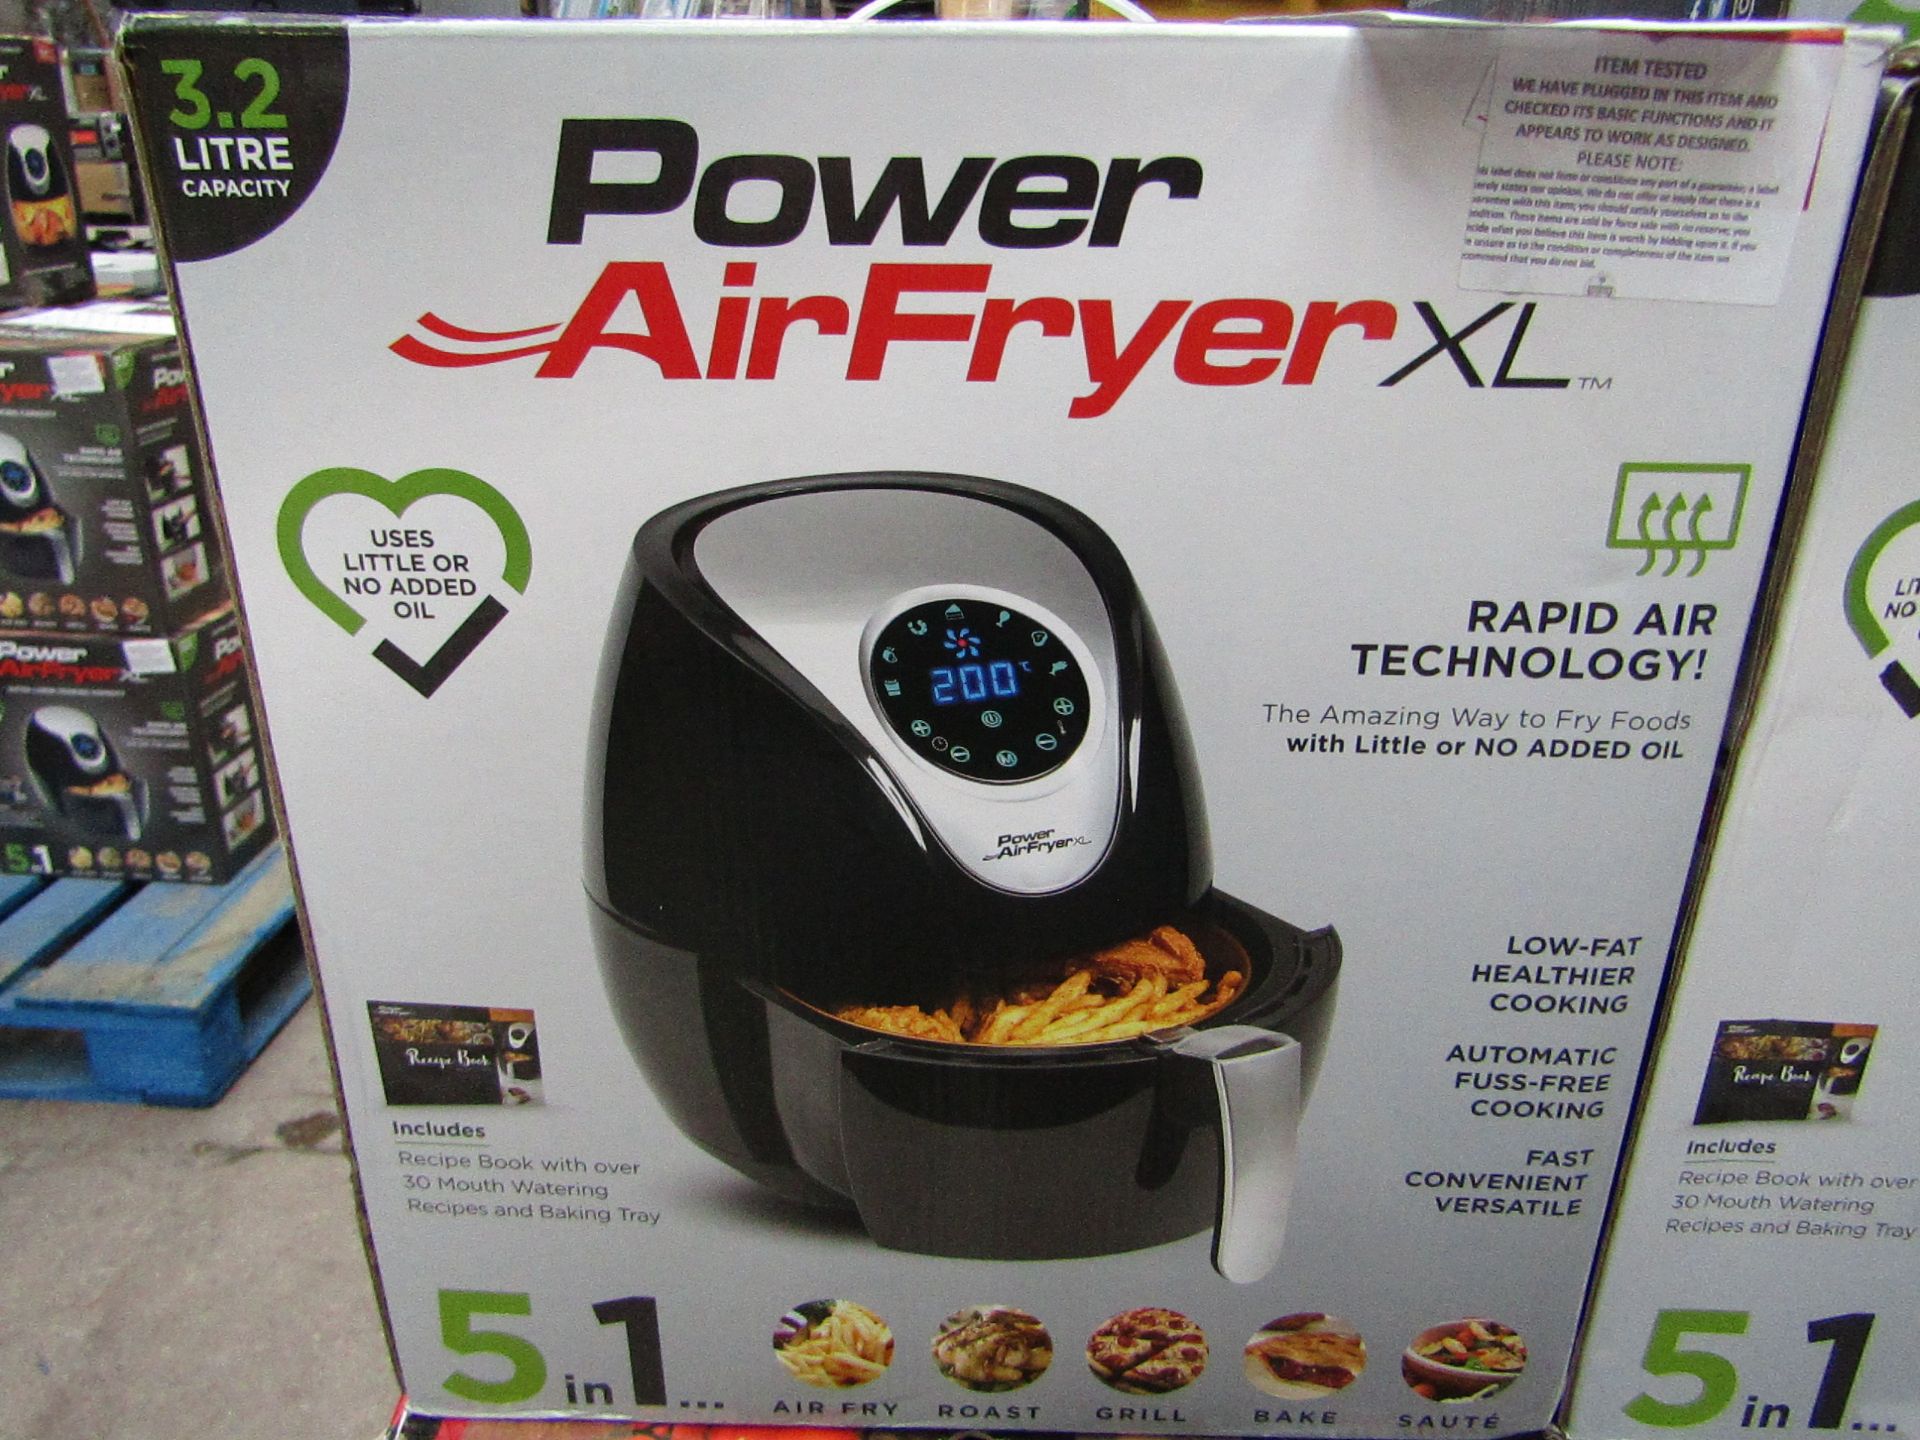 Power Air Fryer XL Black 3.2L - Express, Tested working and boxed | SKU C5060191469838 | RRP œ69: